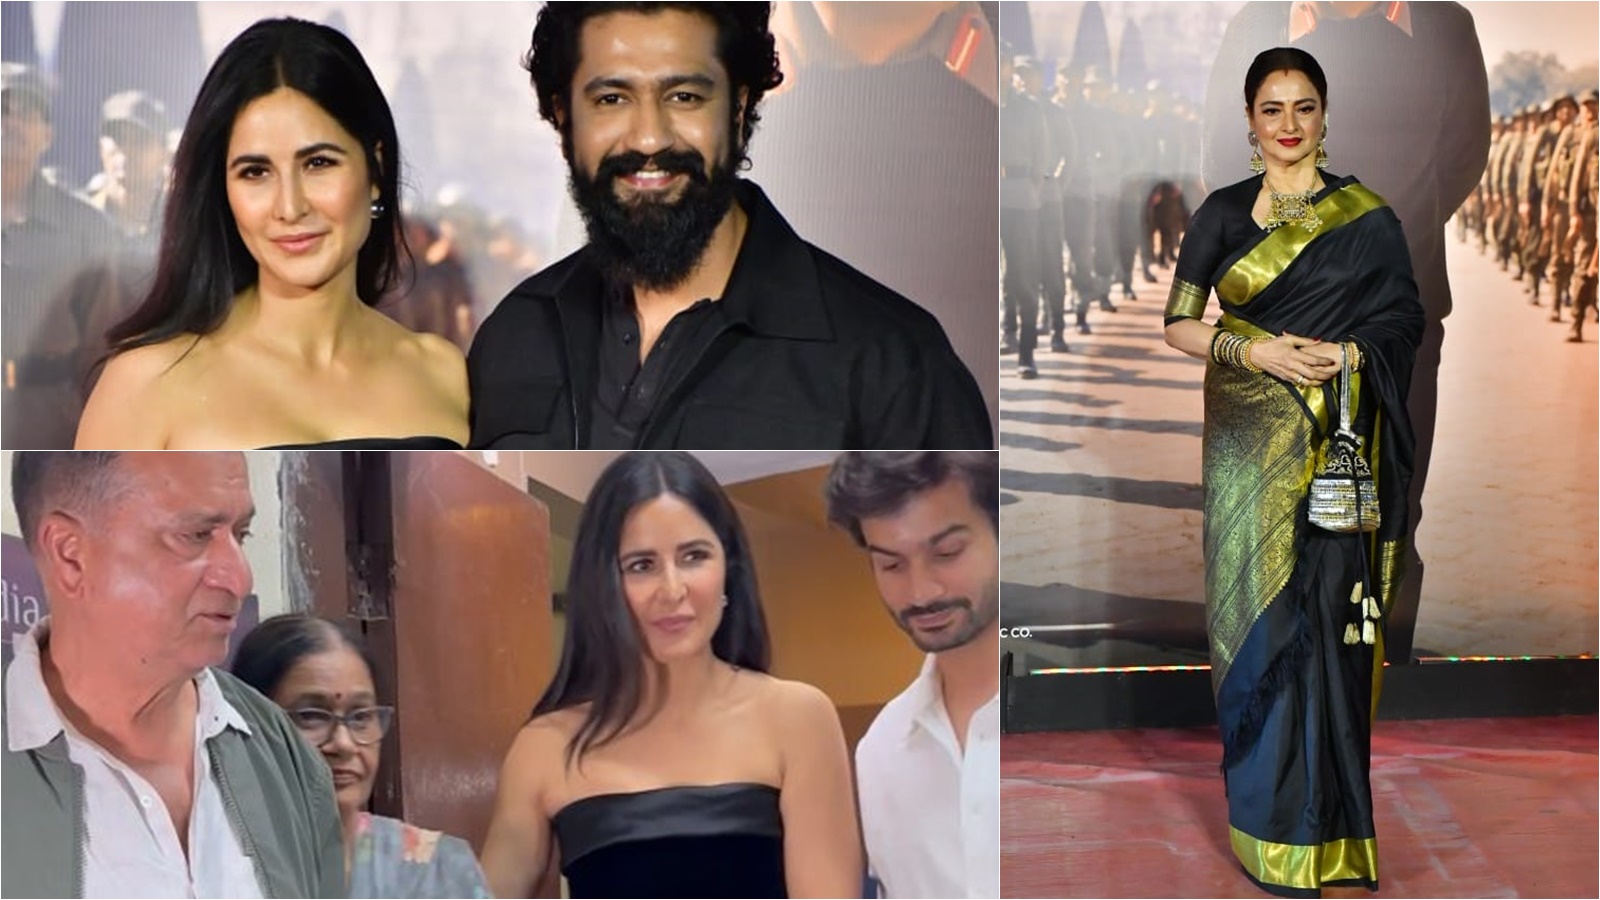 Katrina Kaif First Xxx - Doting daughter-in-law Katrina Kaif tends to Vicky Kaushal's parents, Rekha  salutes Sam Bahadur poster. See photos and videos from premiere event |  Bollywood News - The Indian Express